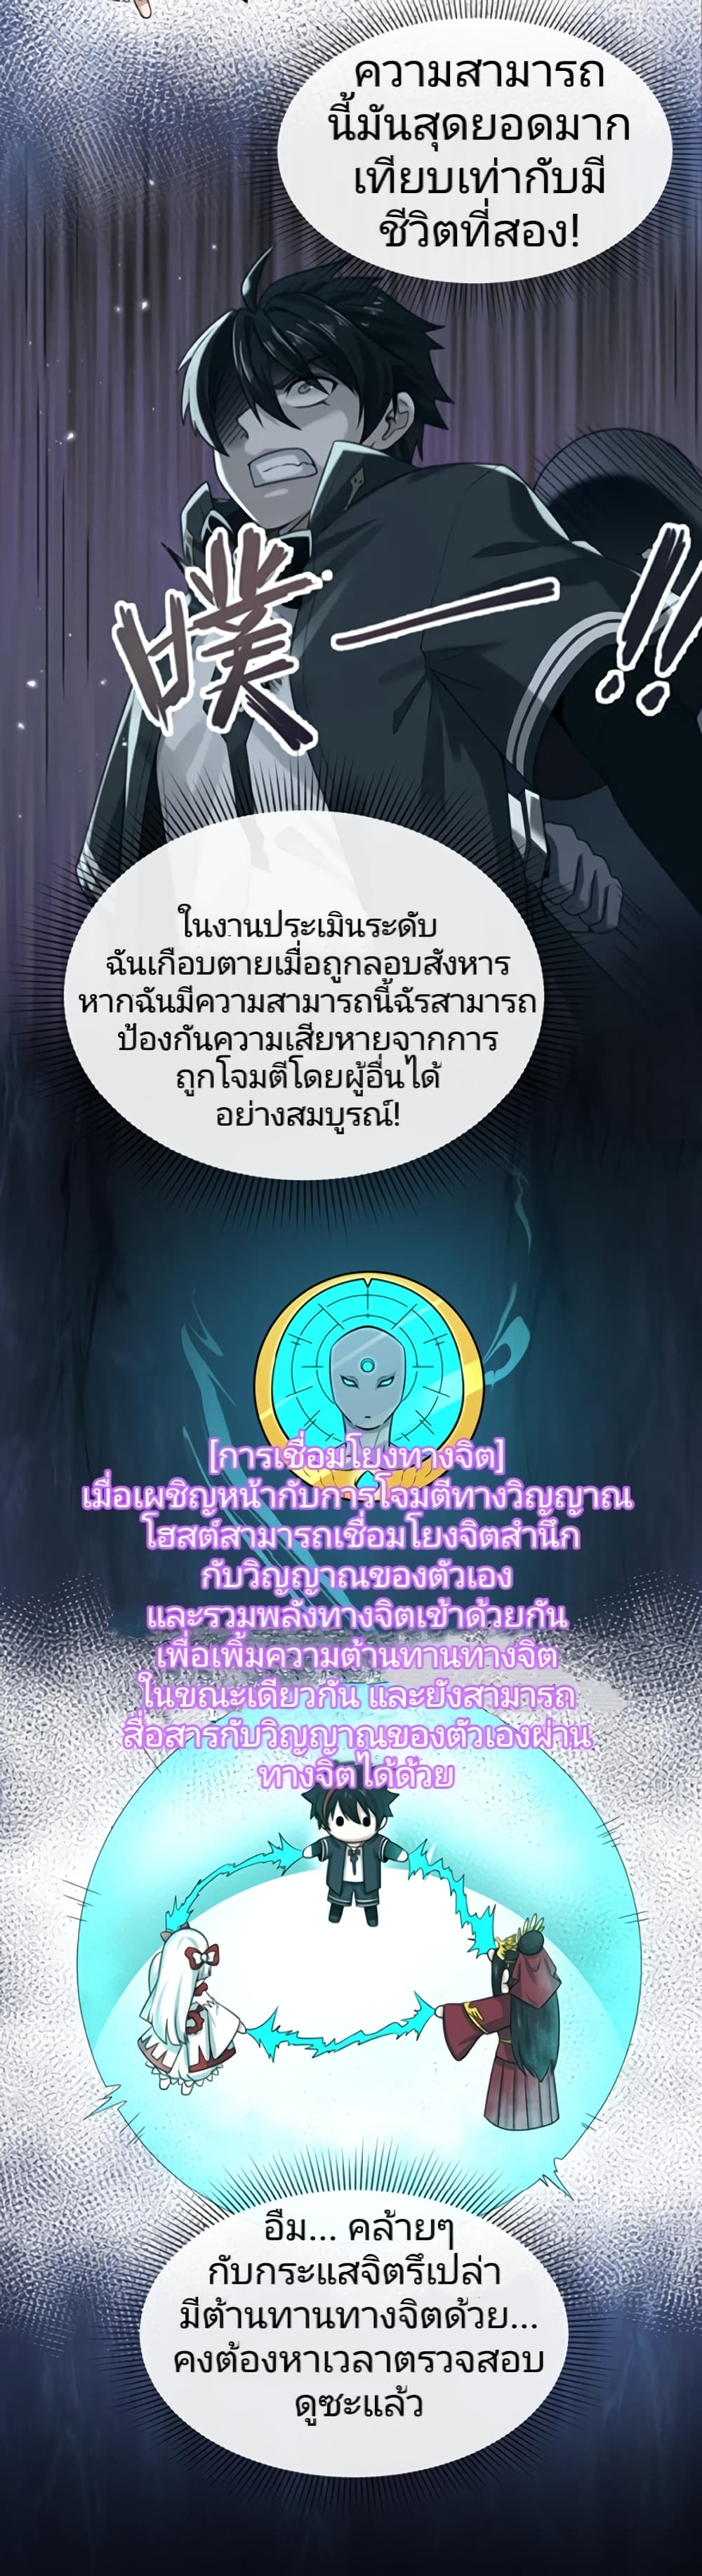 The Age of Ghost Spirits à¸à¸­à¸à¸à¸µà¹ 41 (13)